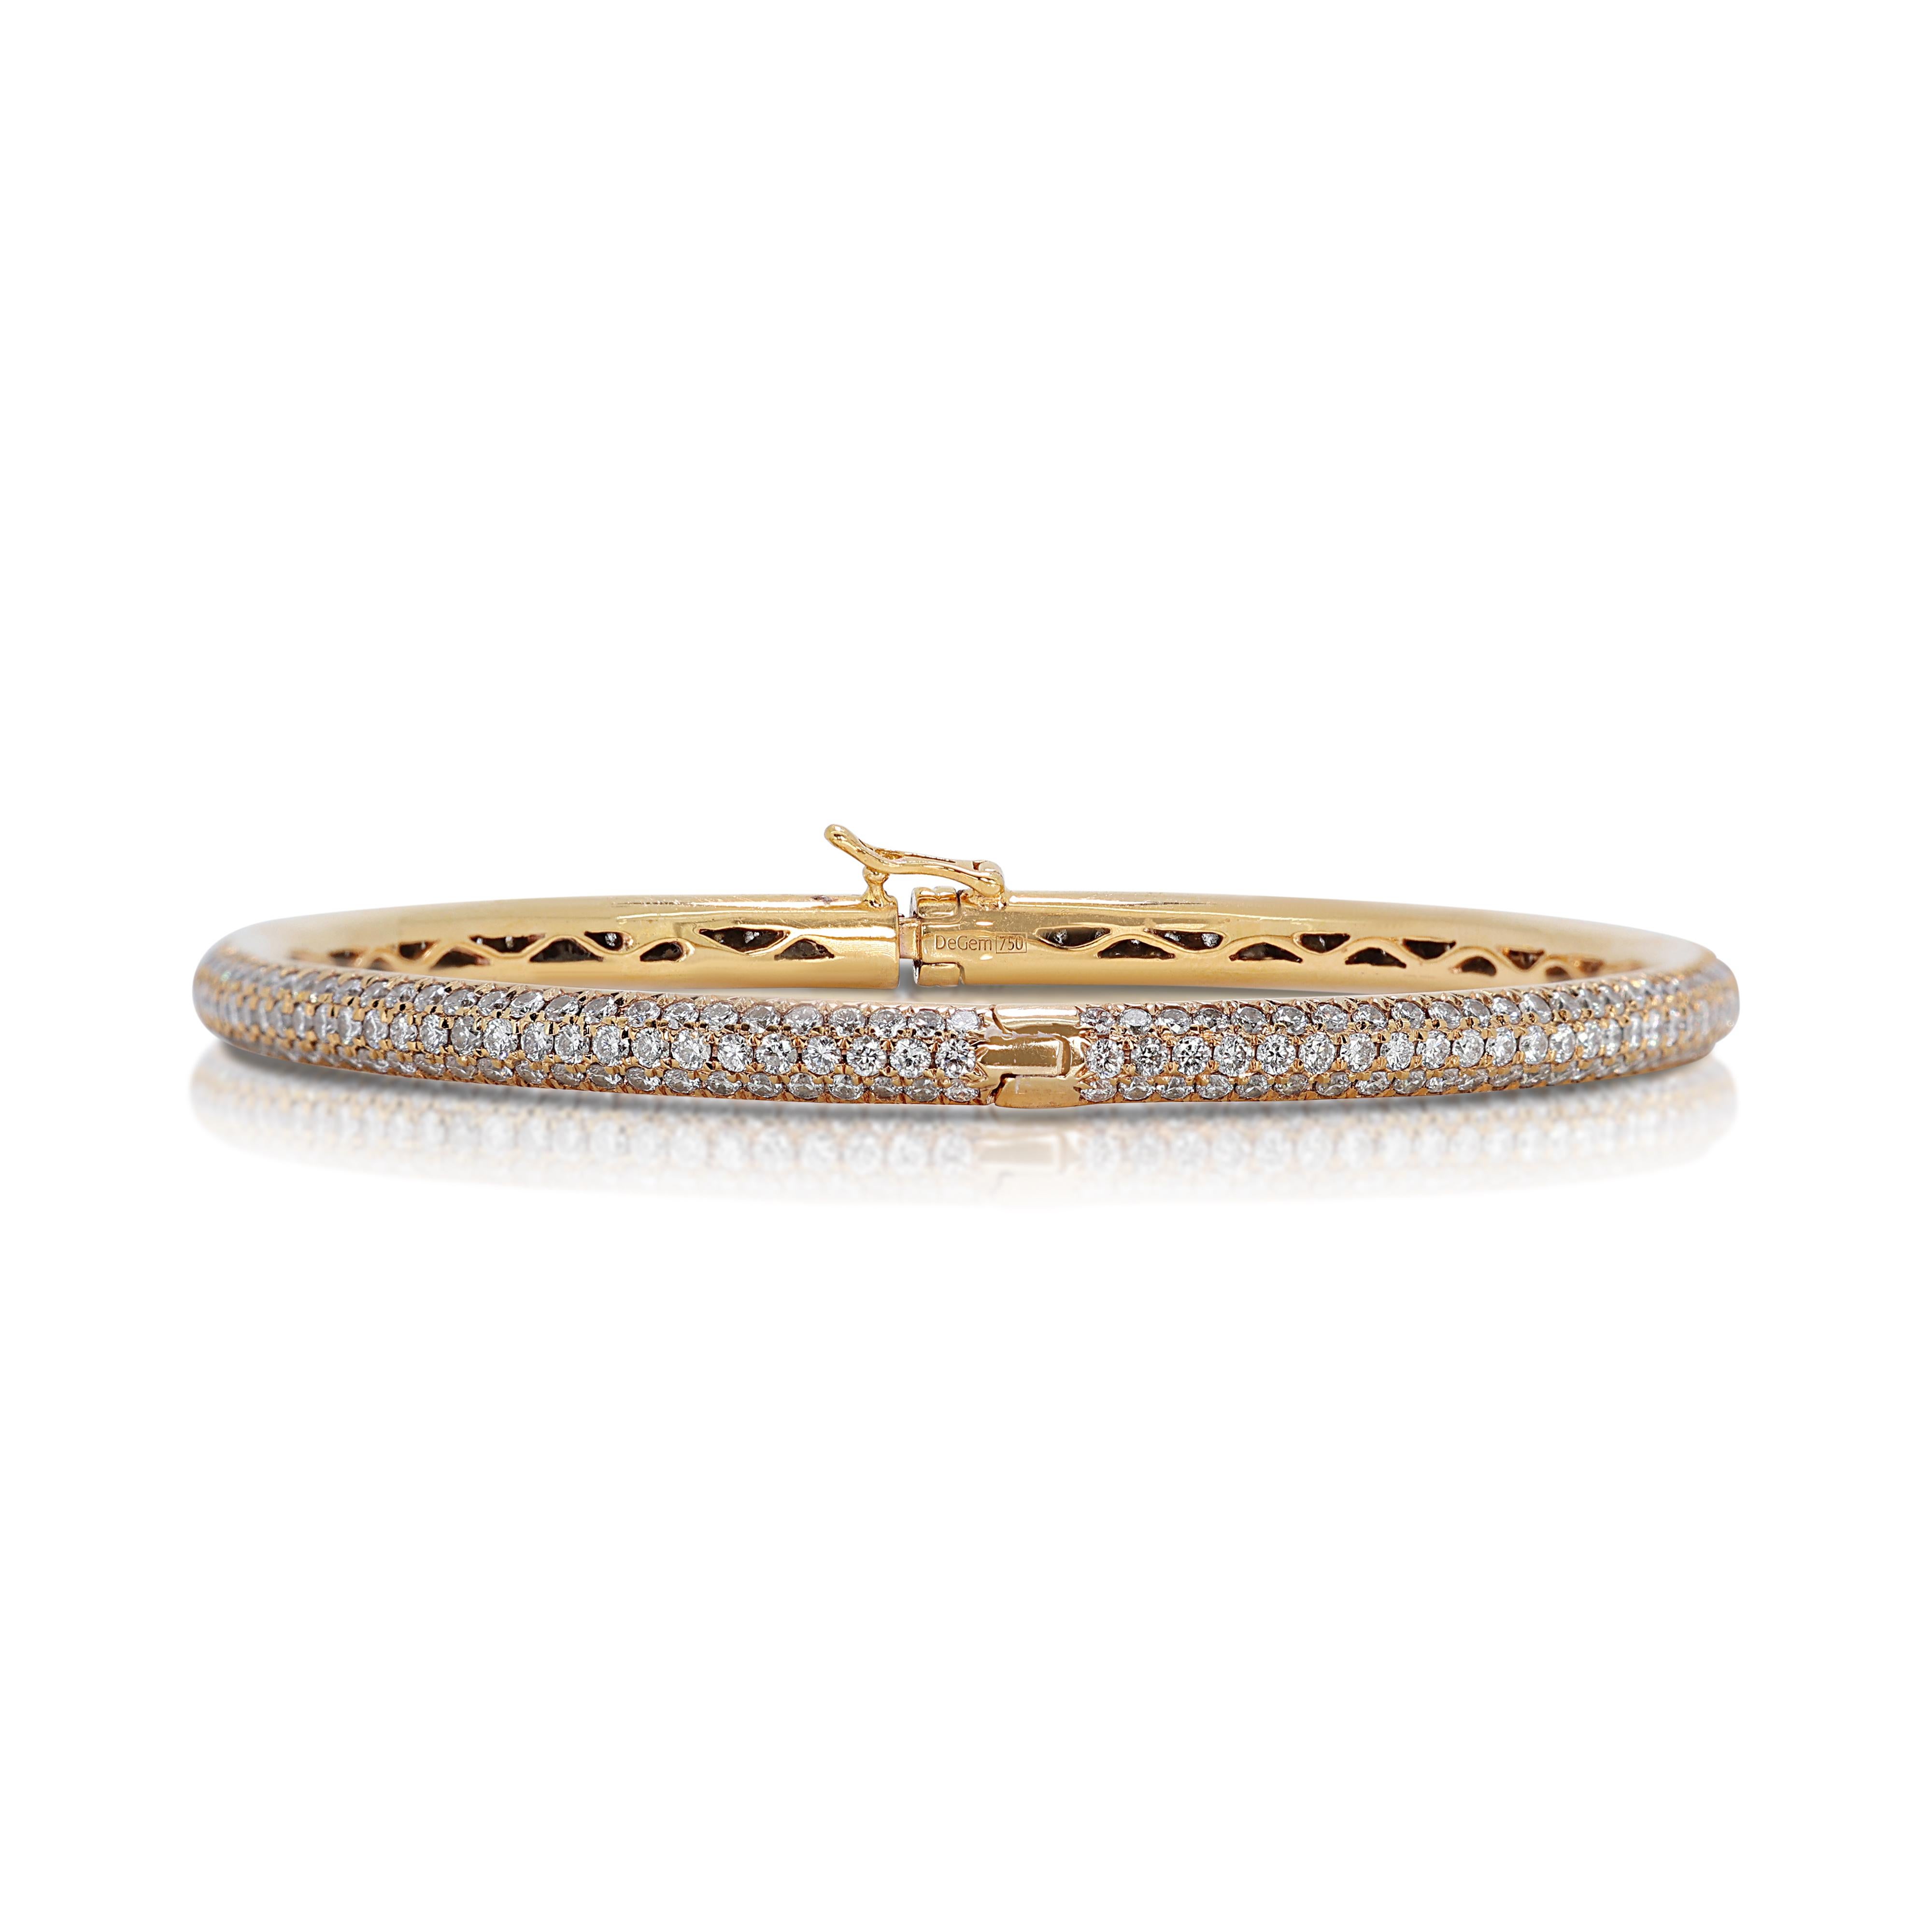 Radiant 3.78ct Diamonds Bangle in 18K Yellow Gold  In Excellent Condition For Sale In רמת גן, IL